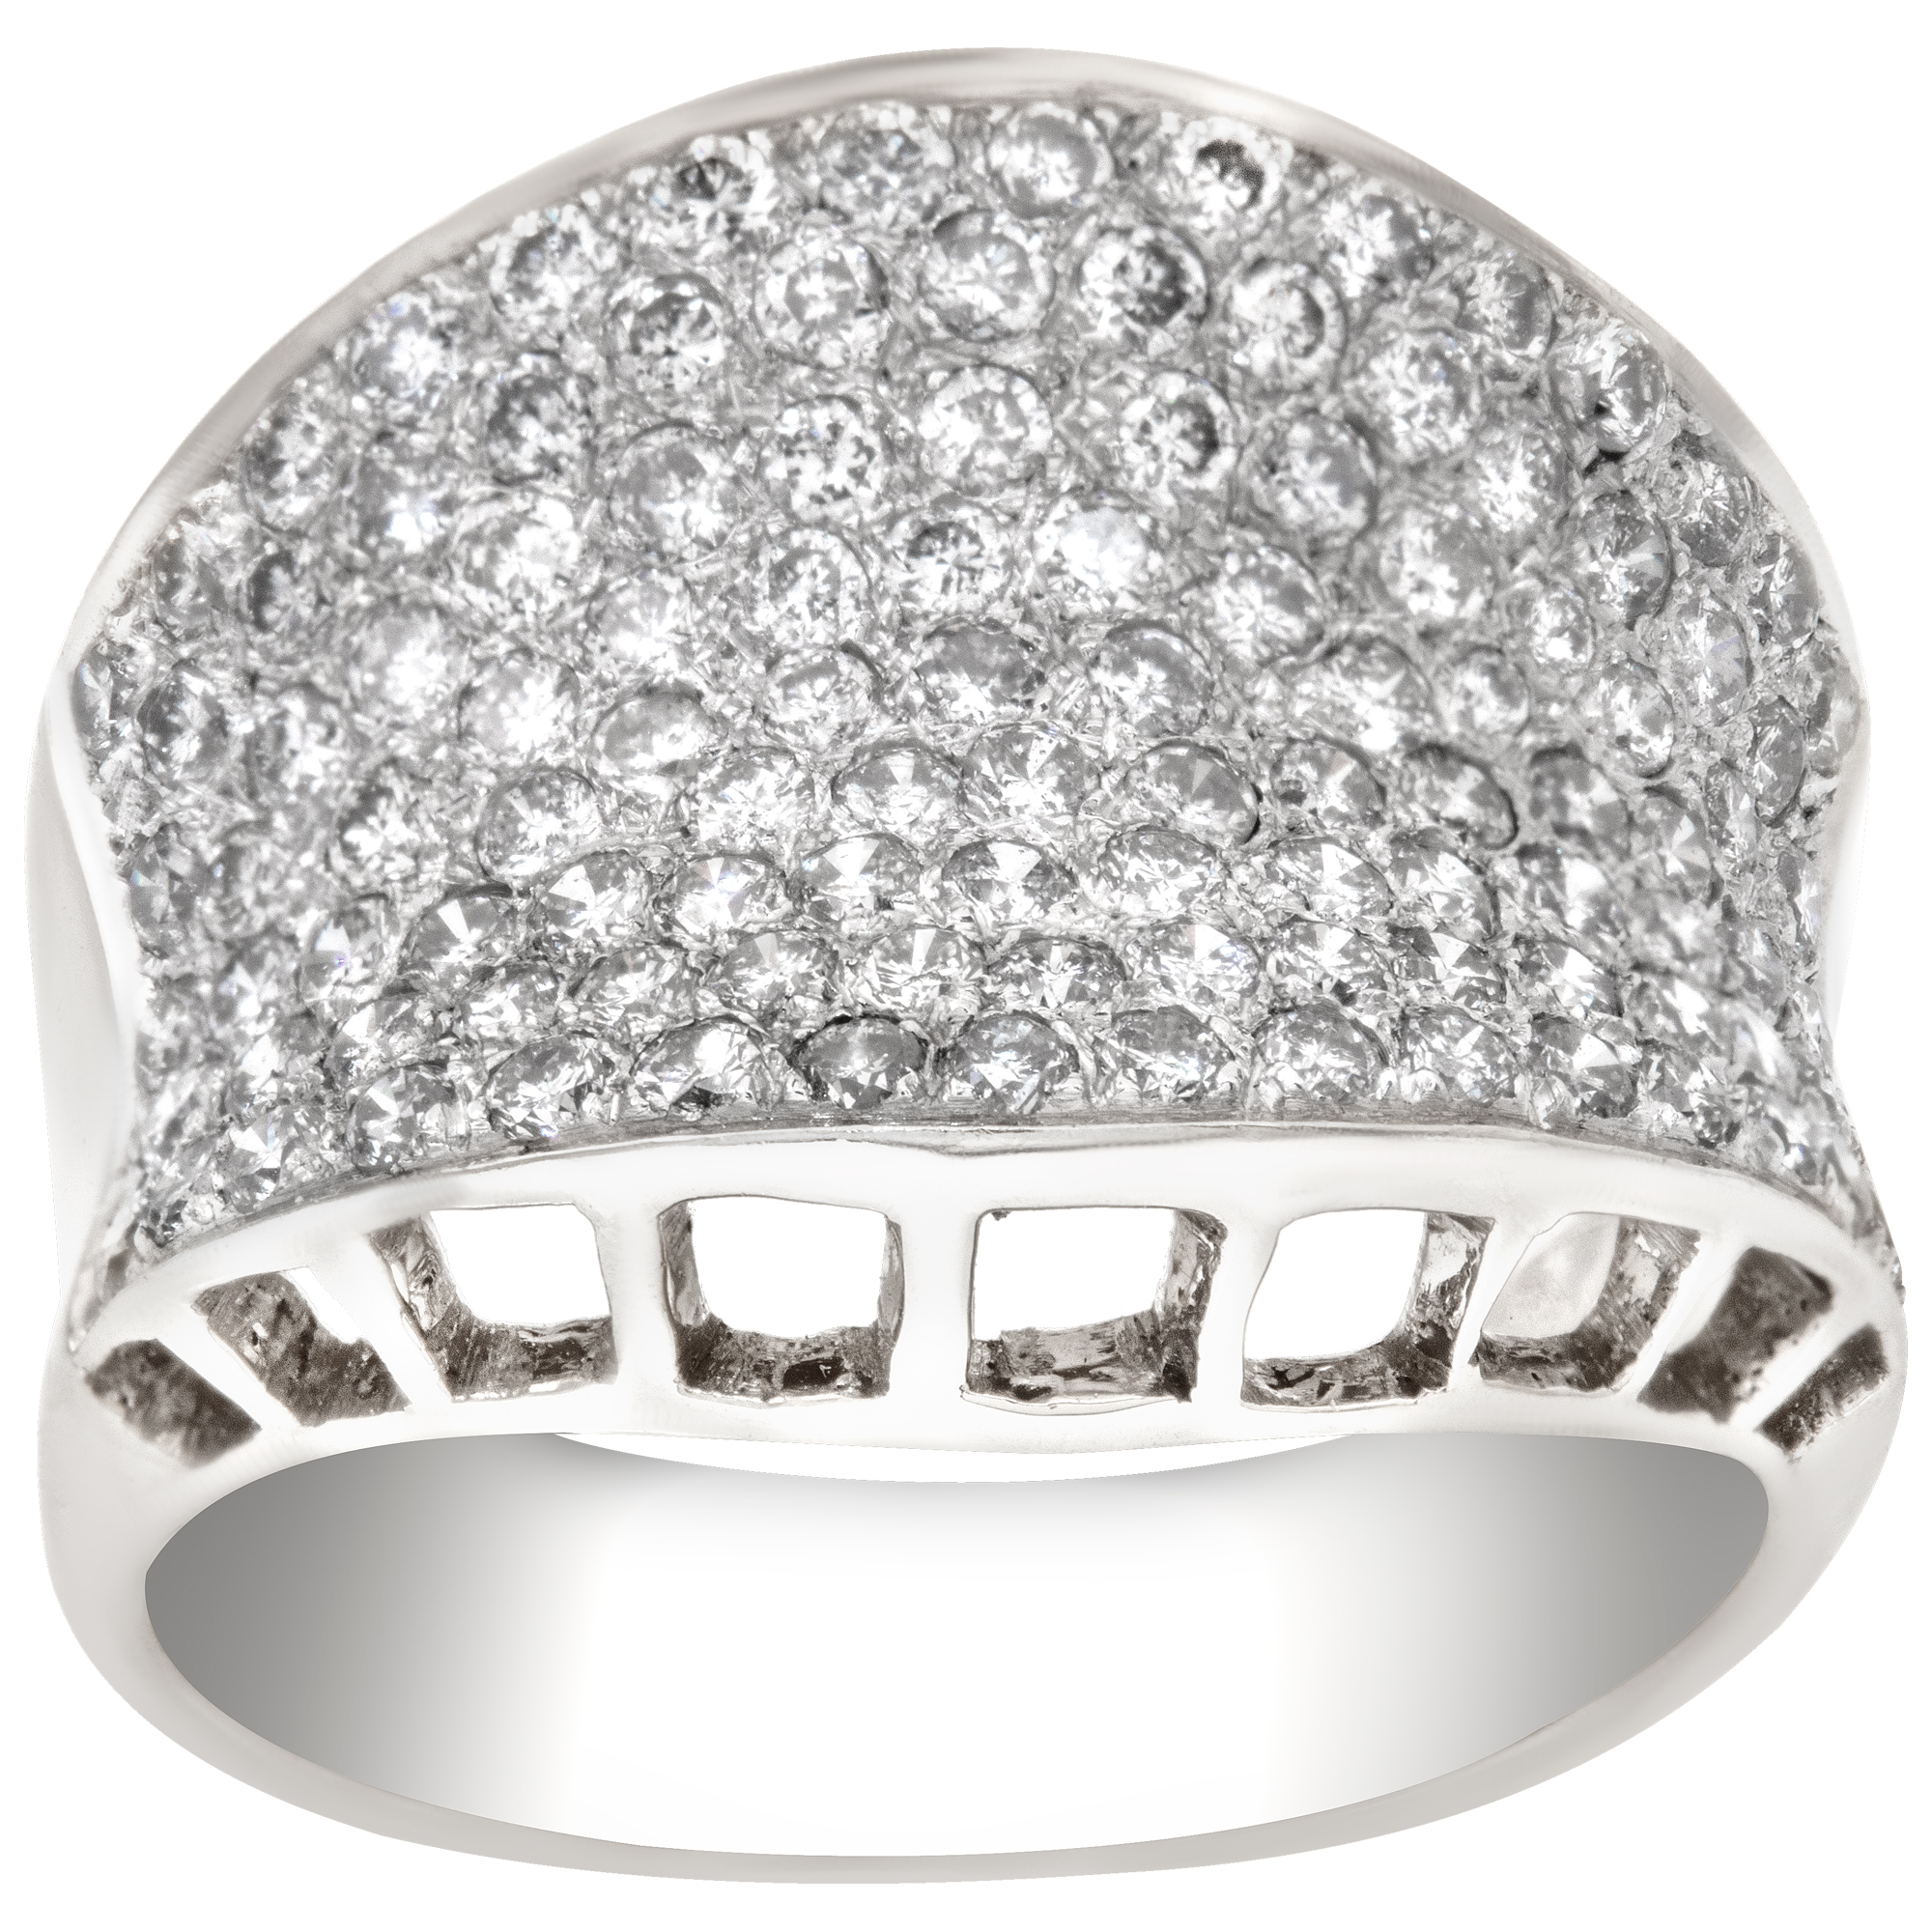 Exquisite pave diamond ring in white gold. 1.25 carats in pave diamonds. Size 6